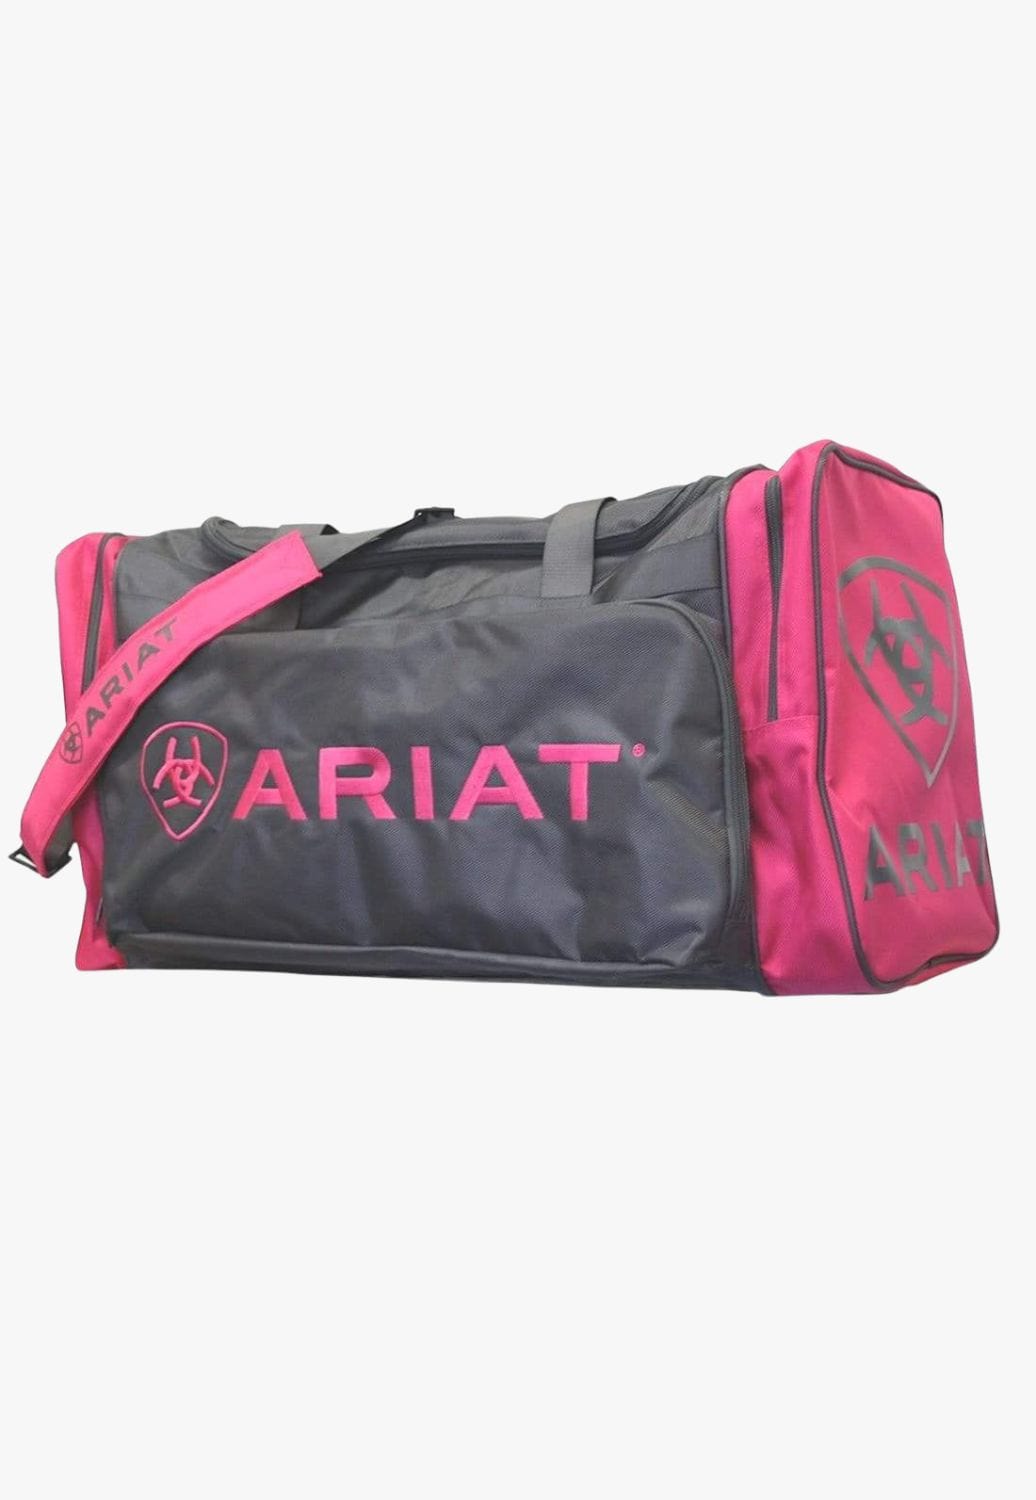 Ariat TRAVEL - Travel Bags Pink/Charcoal Ariat Gear Bag